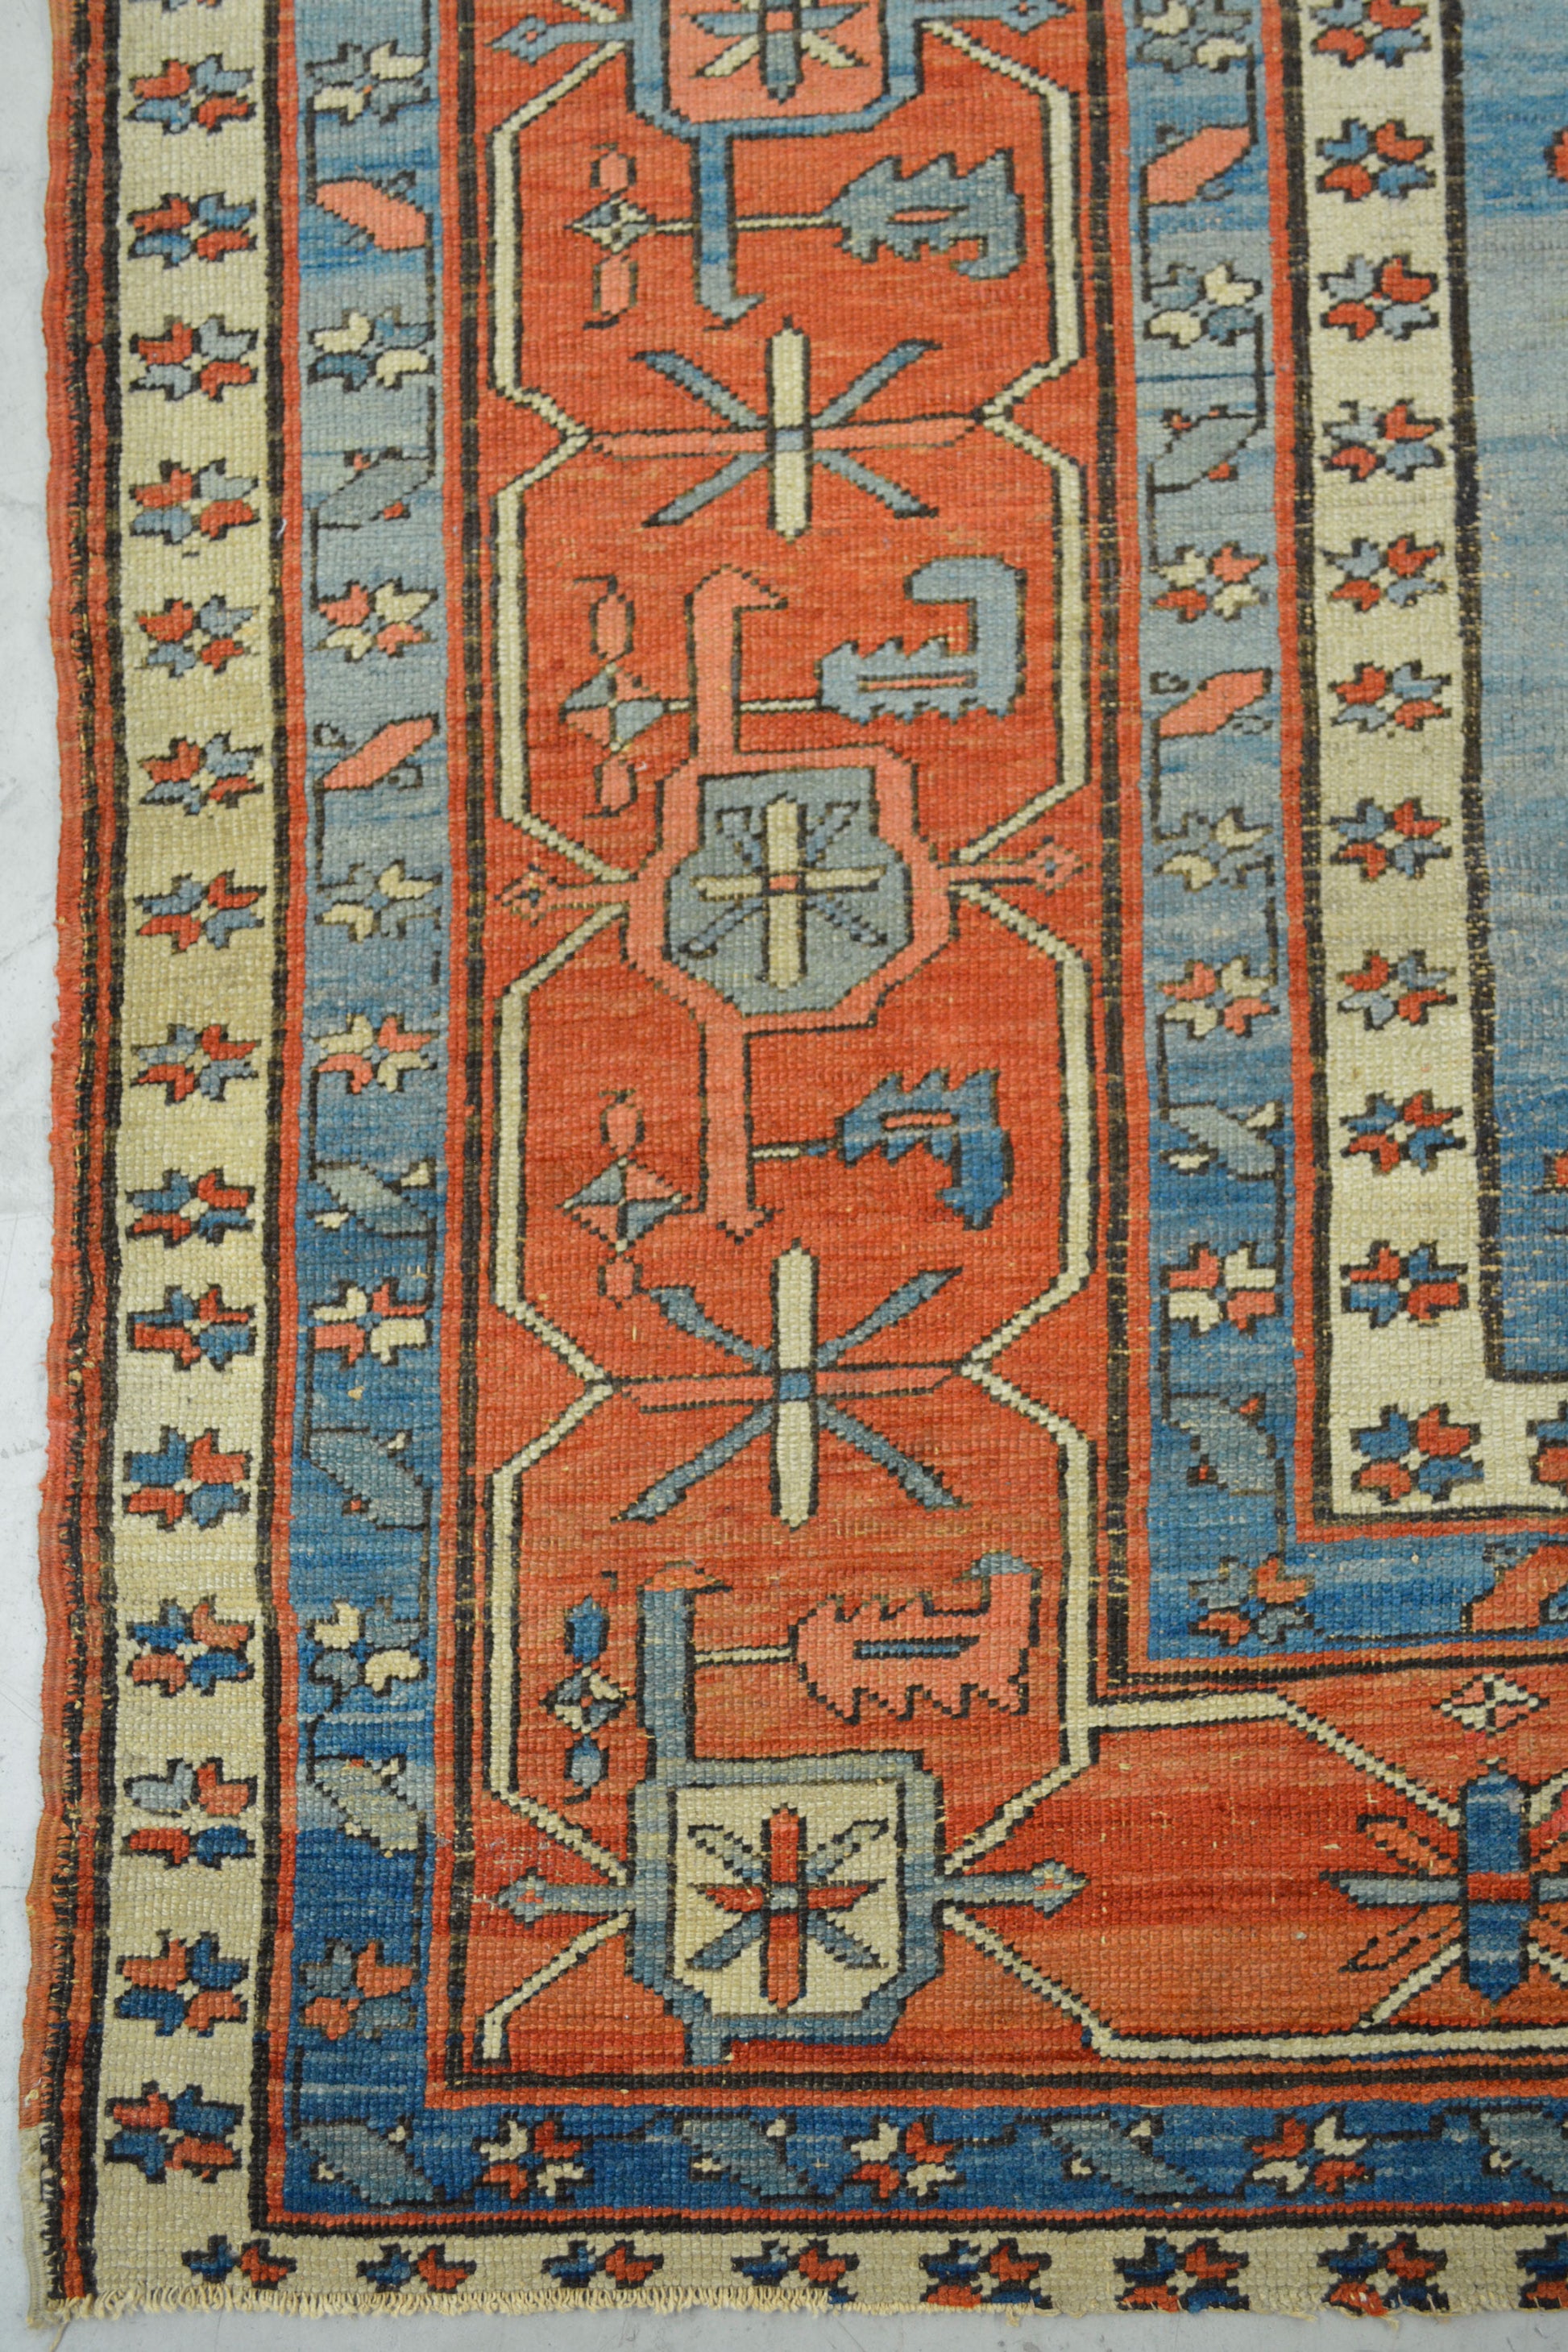 This rug comes in an antique style with a pleasant color scheme in different tones of blue, orange, white, and green.